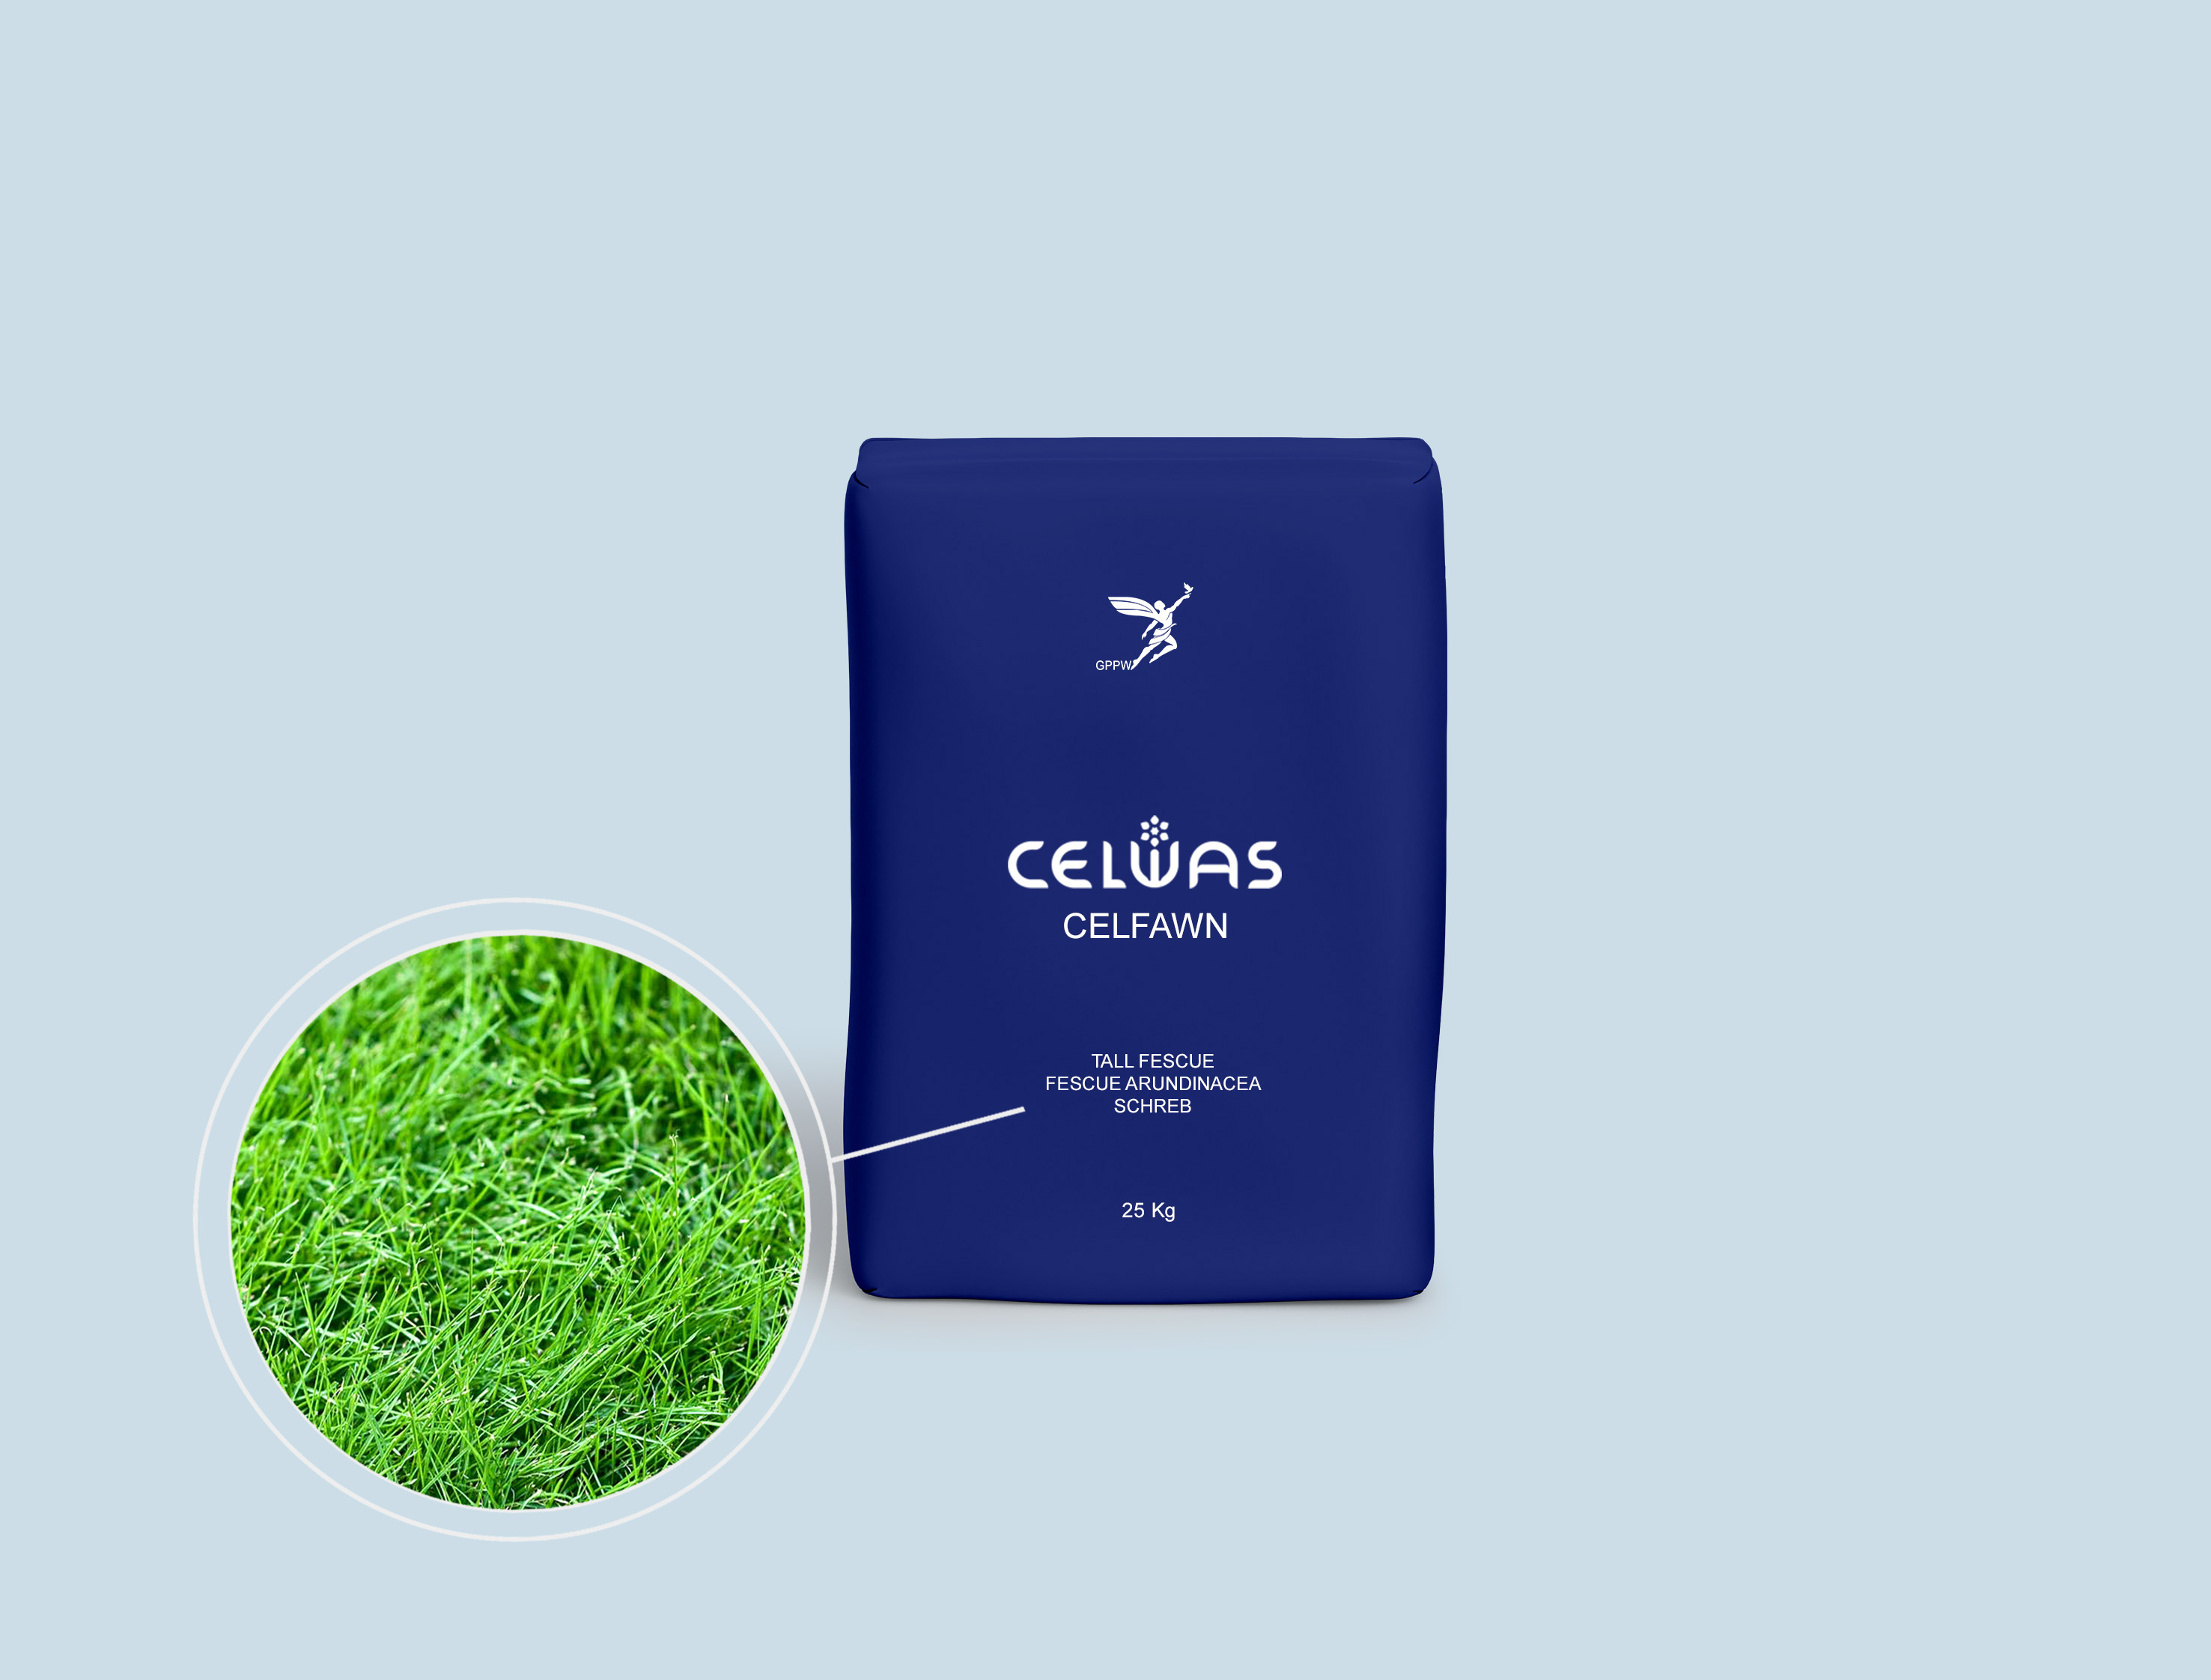 CELFAWN<br />fodder grasses and legumes